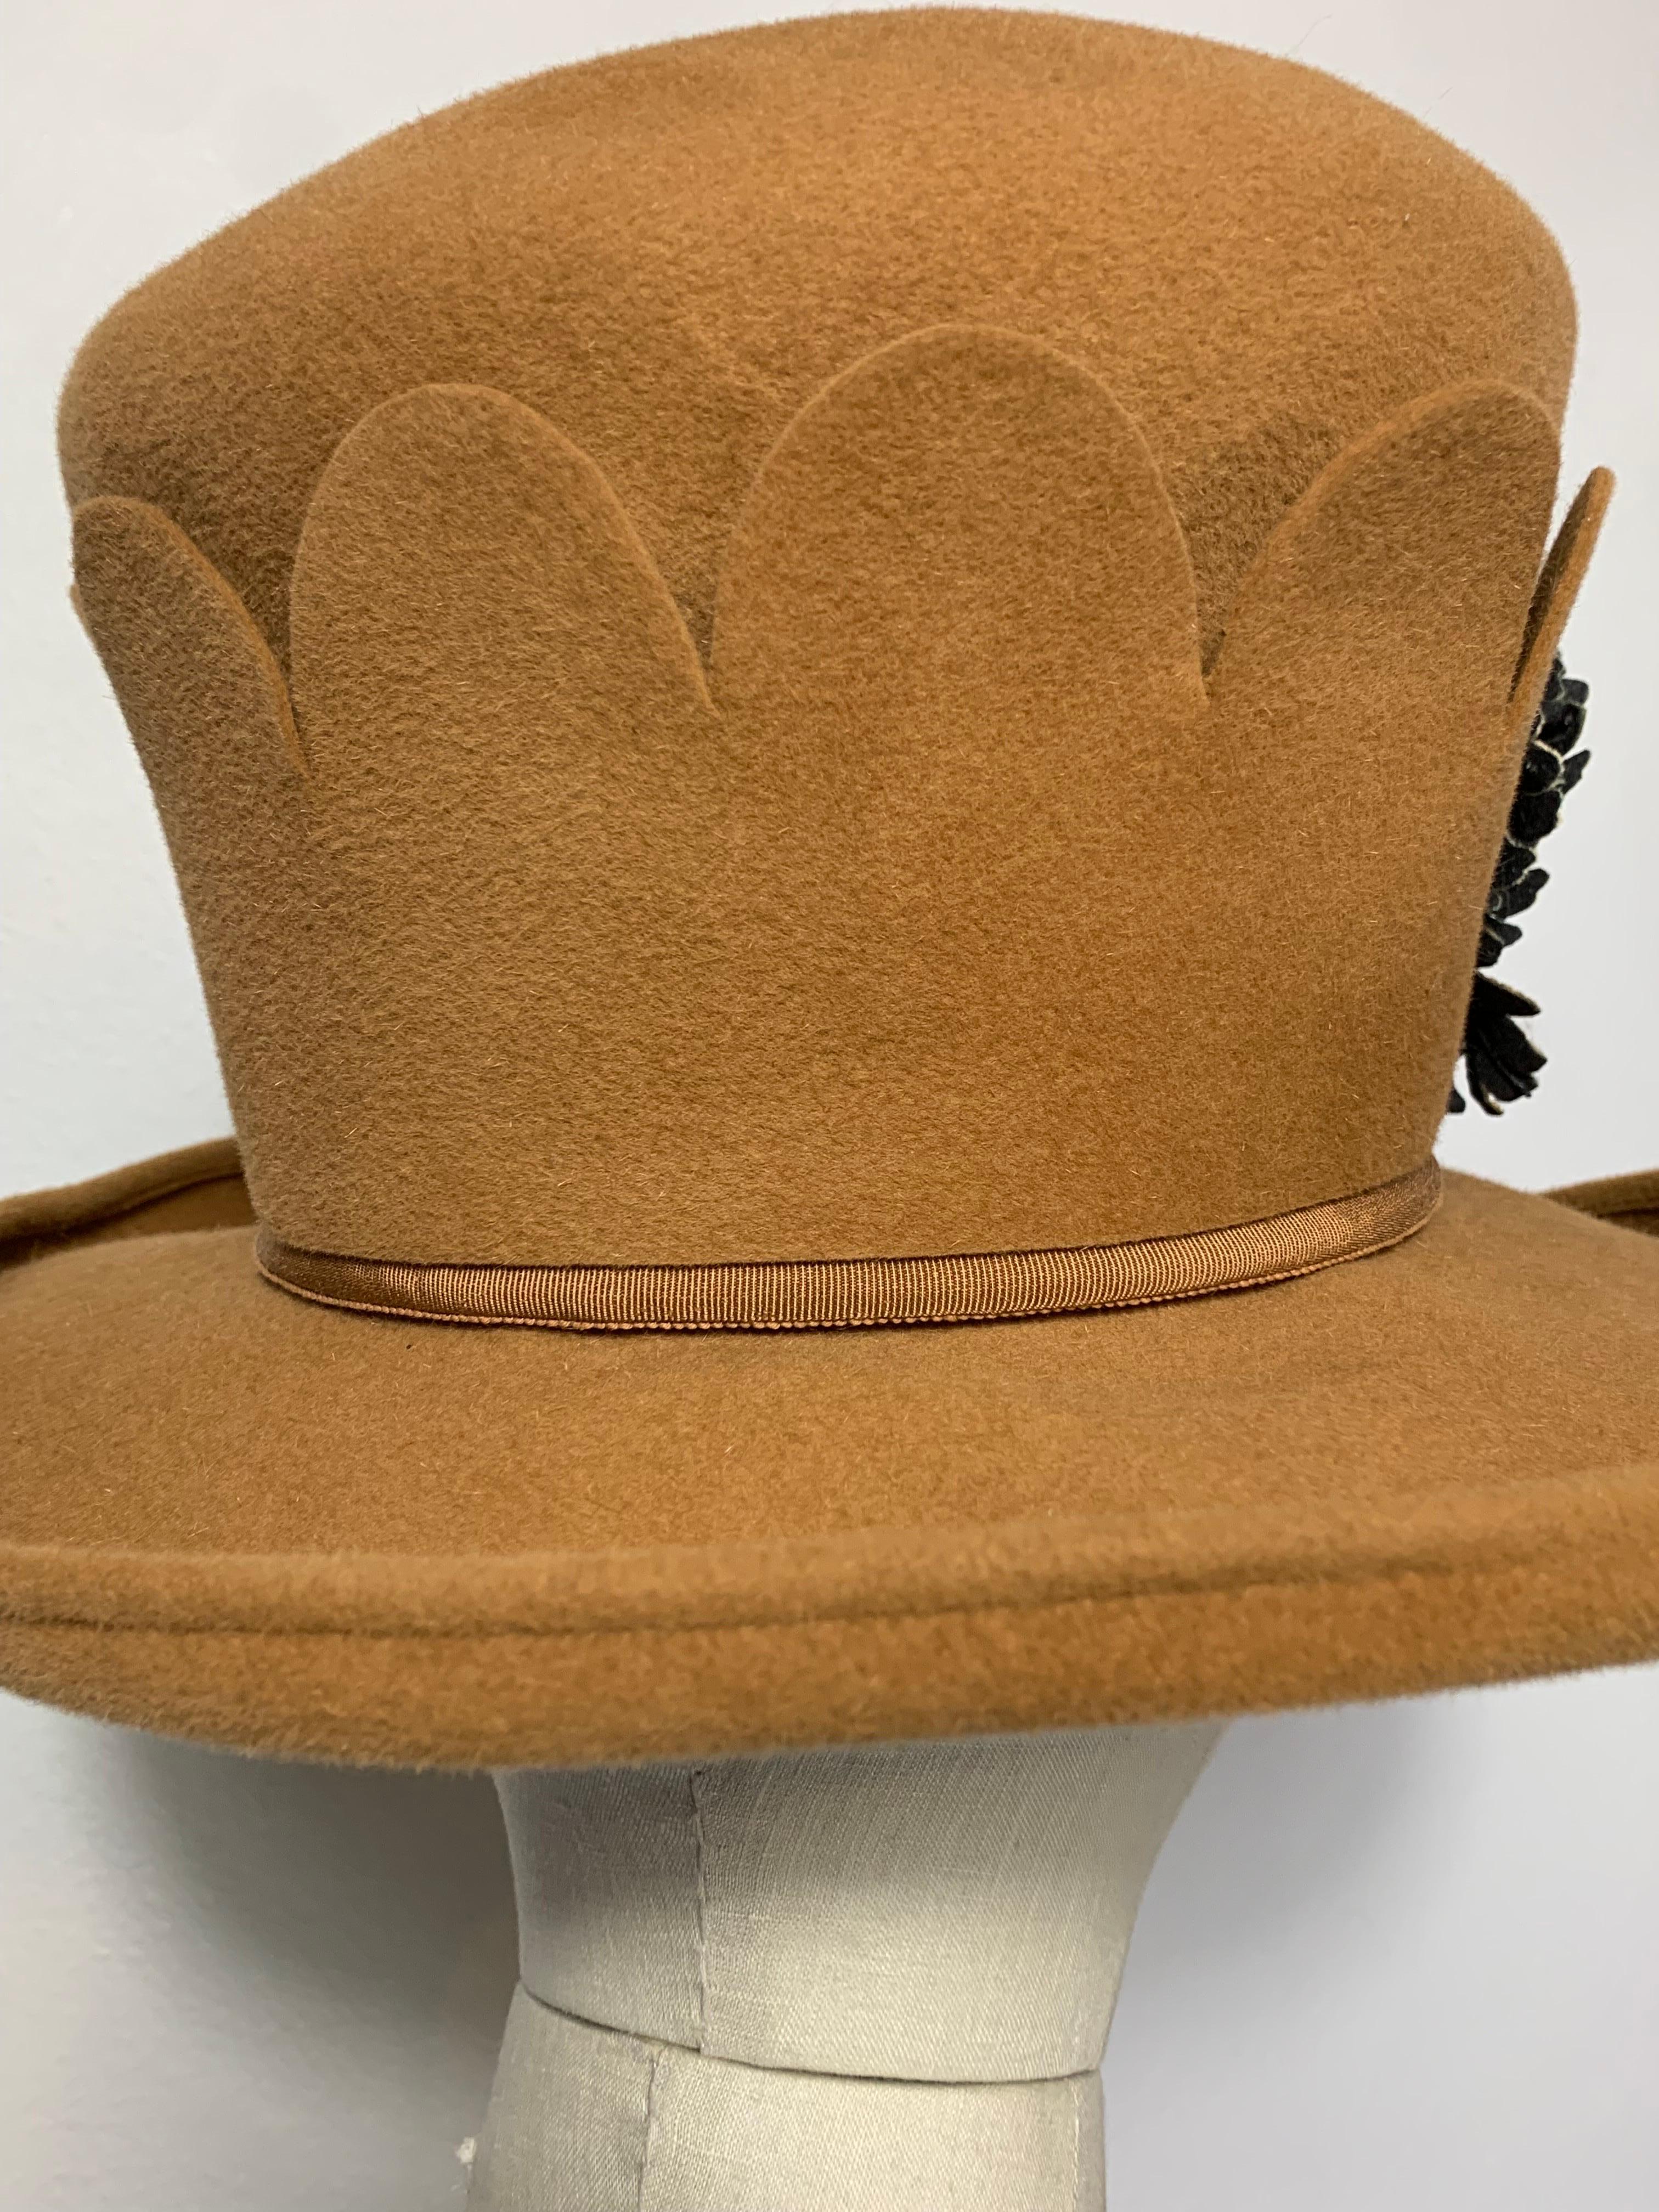 Maison Michel Brimmed Caramel Felt High Top Hat w Silk Leaves & Scalloped Band For Sale 4